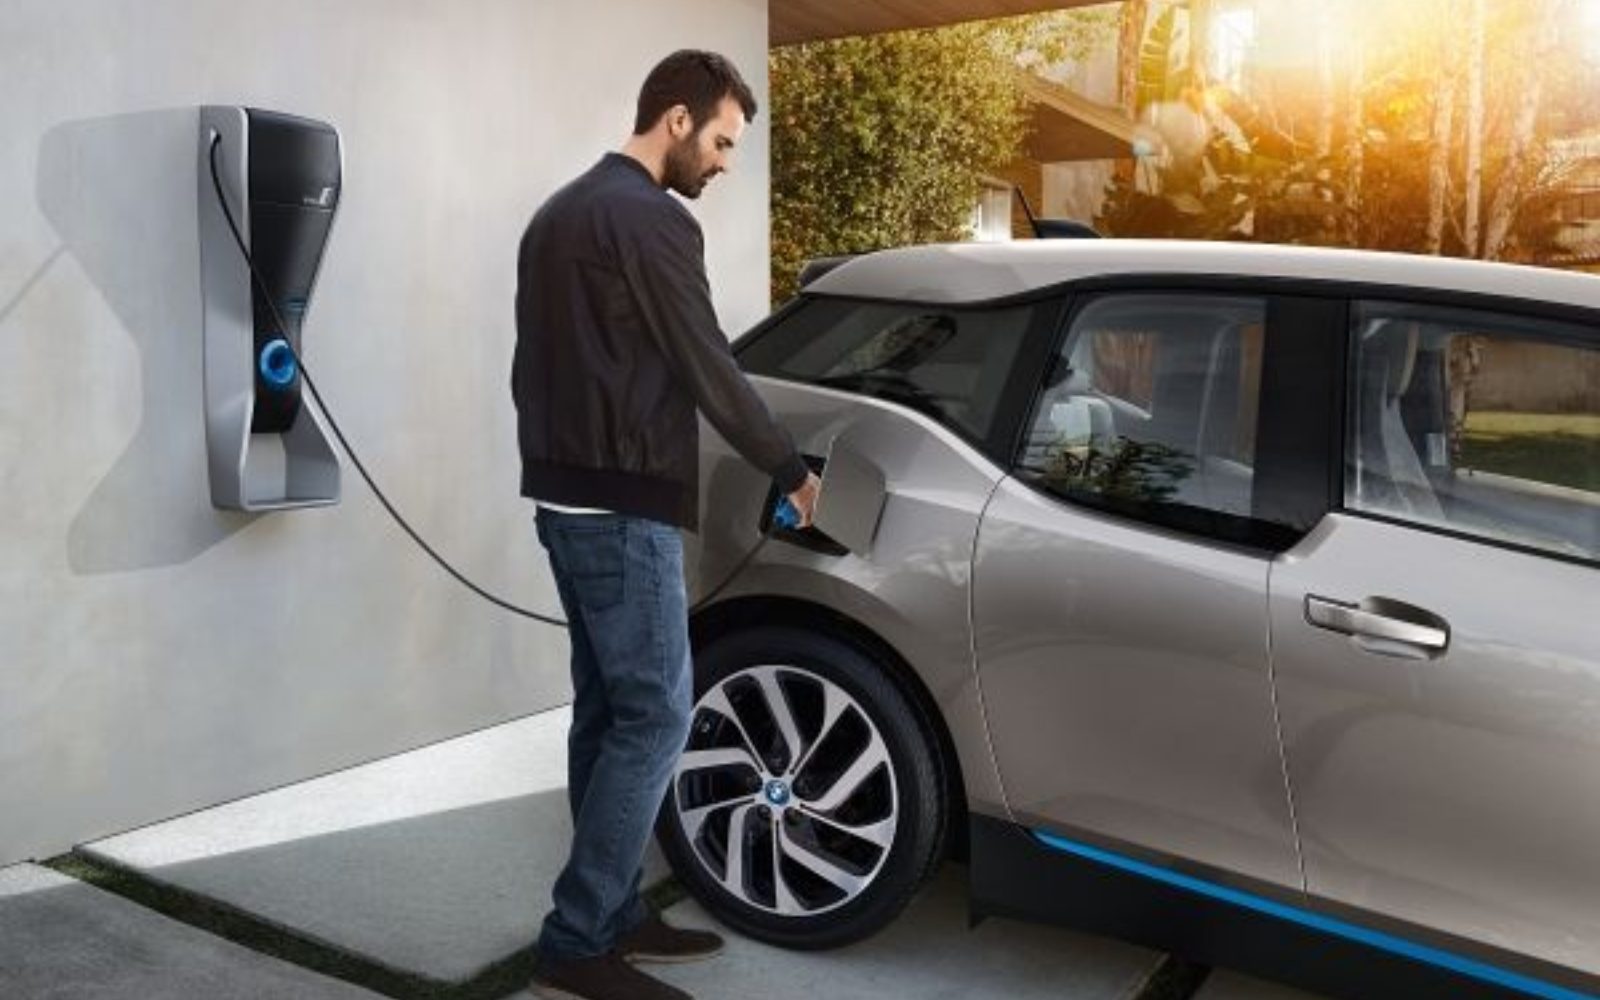 A man plugging in his electric vehicle